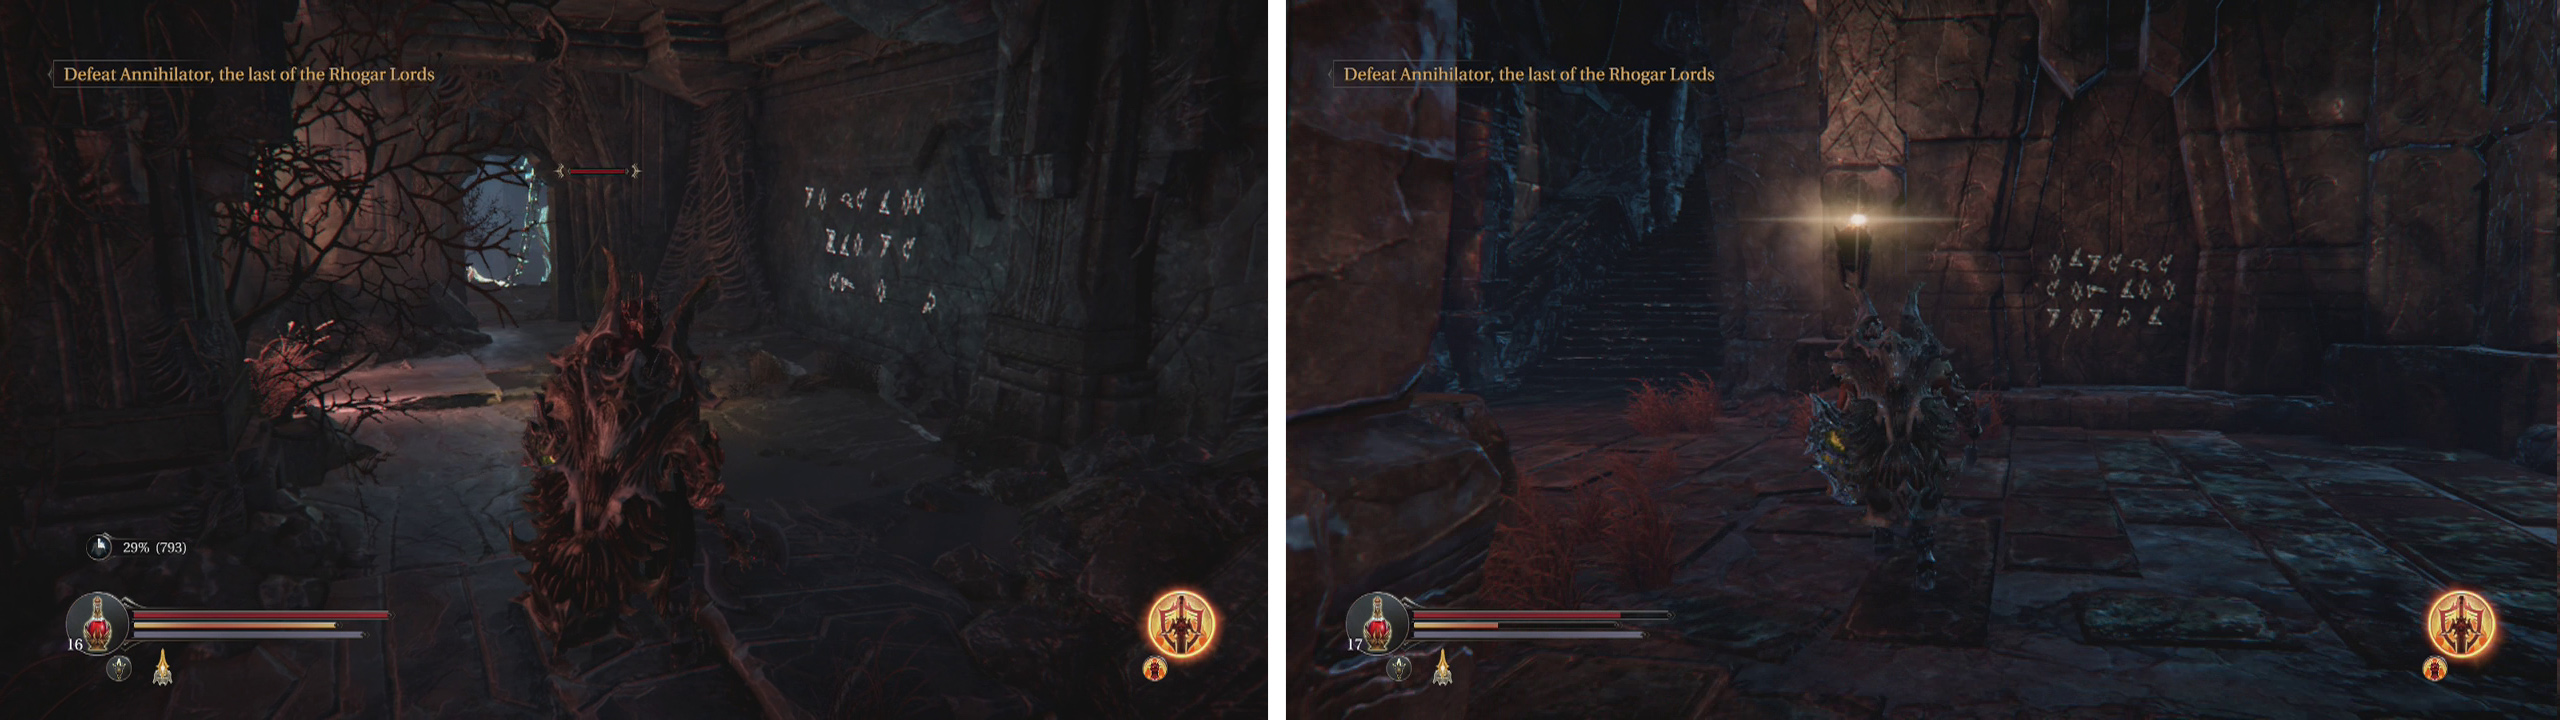 One of the Runic Inscriptions in the Chamber of Lies (left) and at an exit to the Infiltrator's boss fight arena (right).